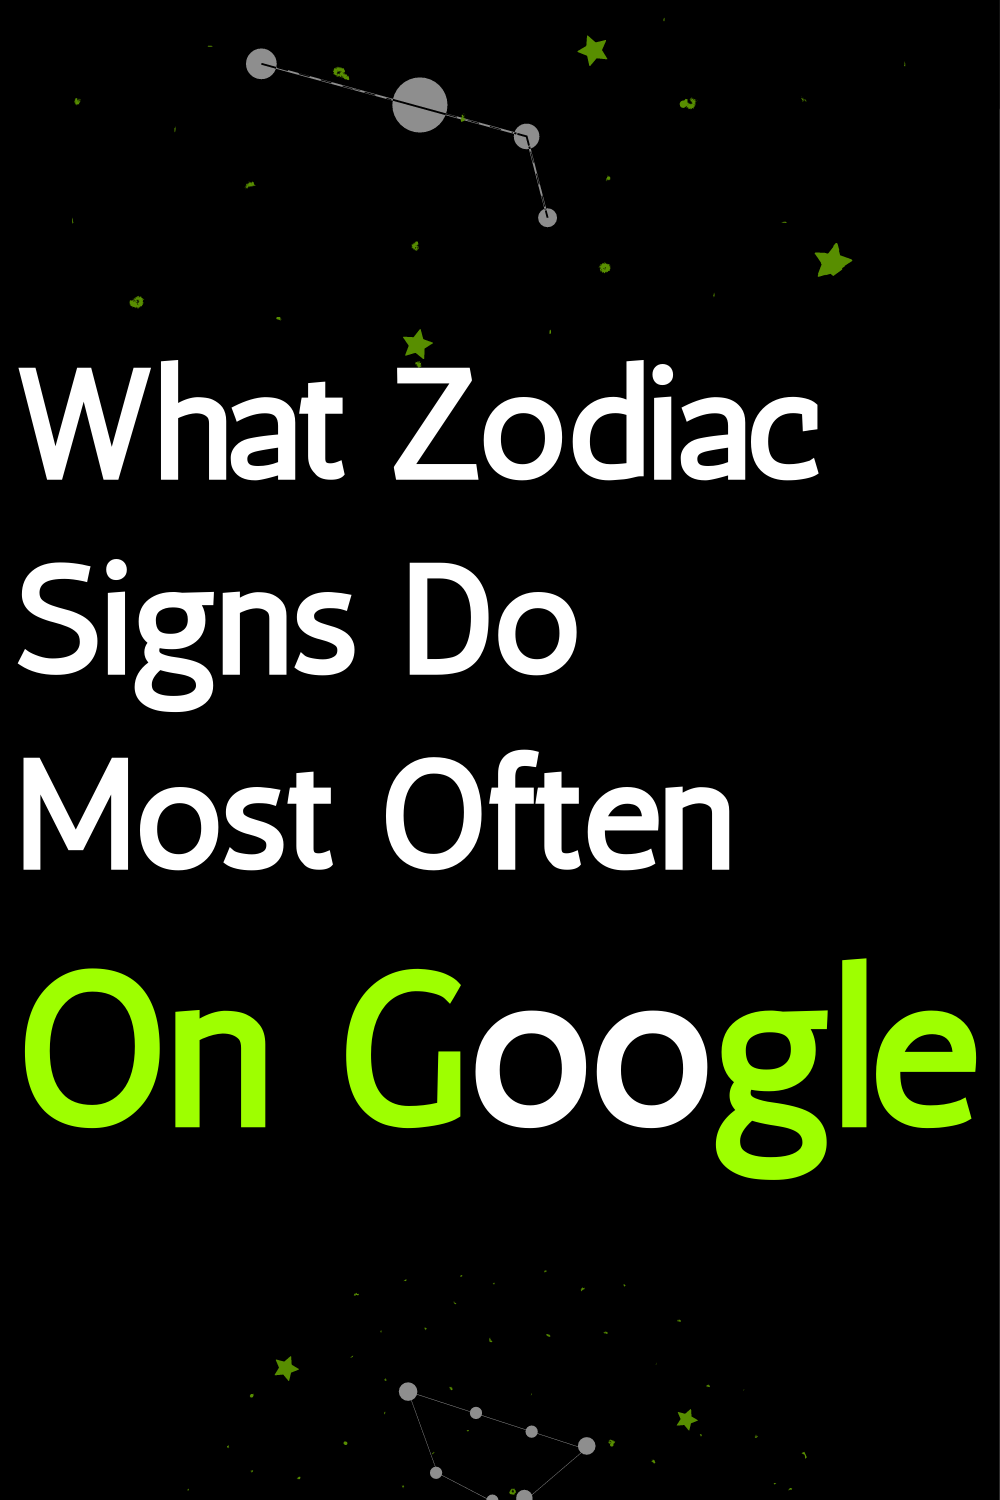 What Zodiac Signs Do Most Often On Google